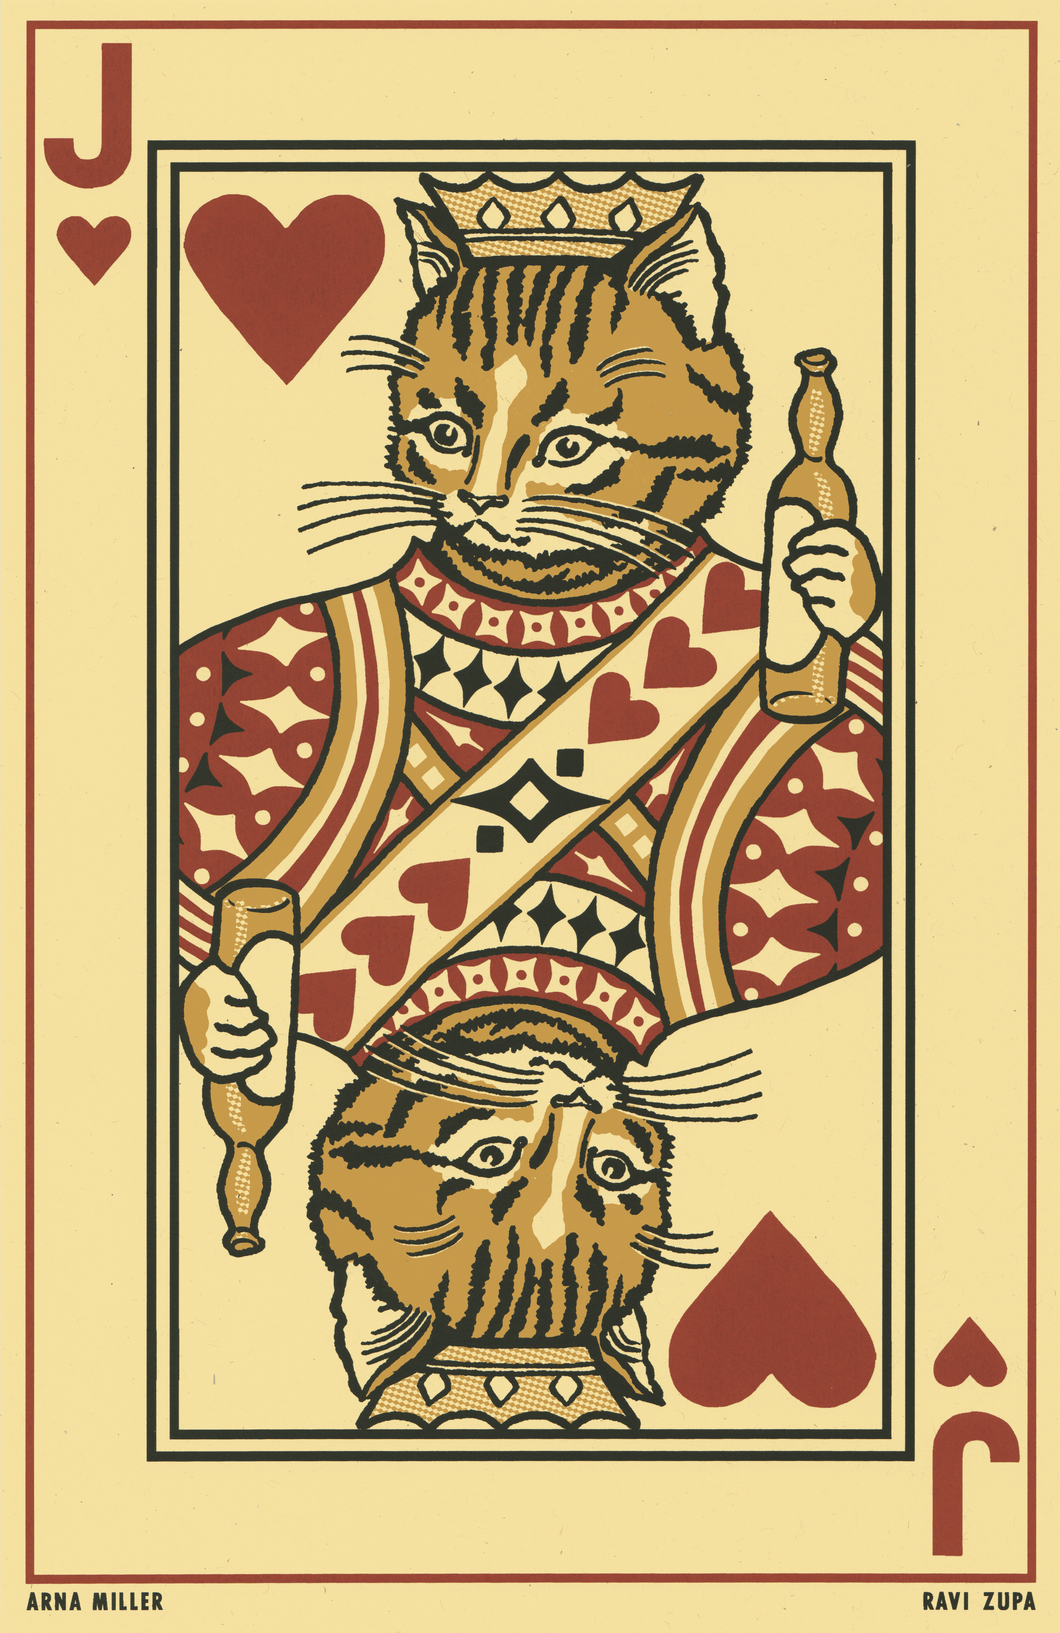 Drunk Cat Series Print - Jack of Hearts - By Arna Miller and Ravi Zupa